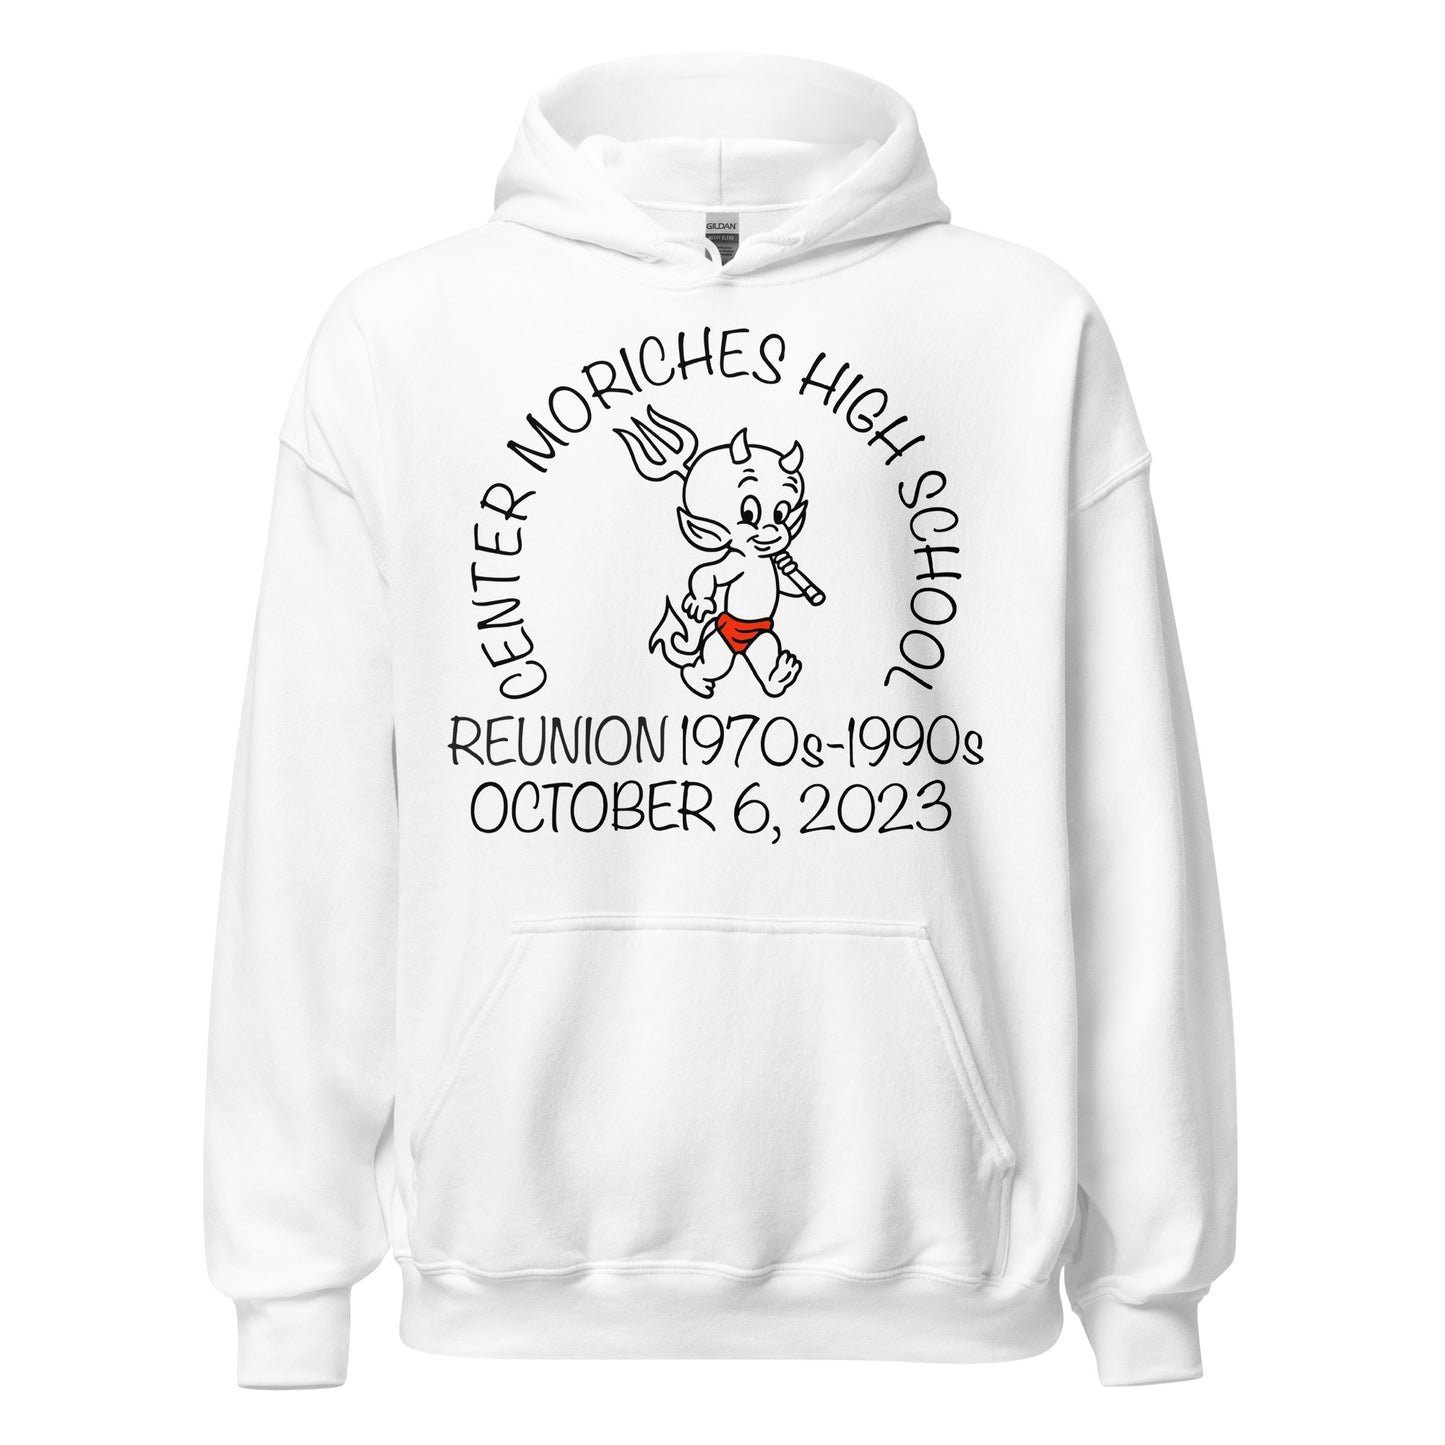 CMHS WHITE Unisex Hoodie-this listing is for the white hoodie only.